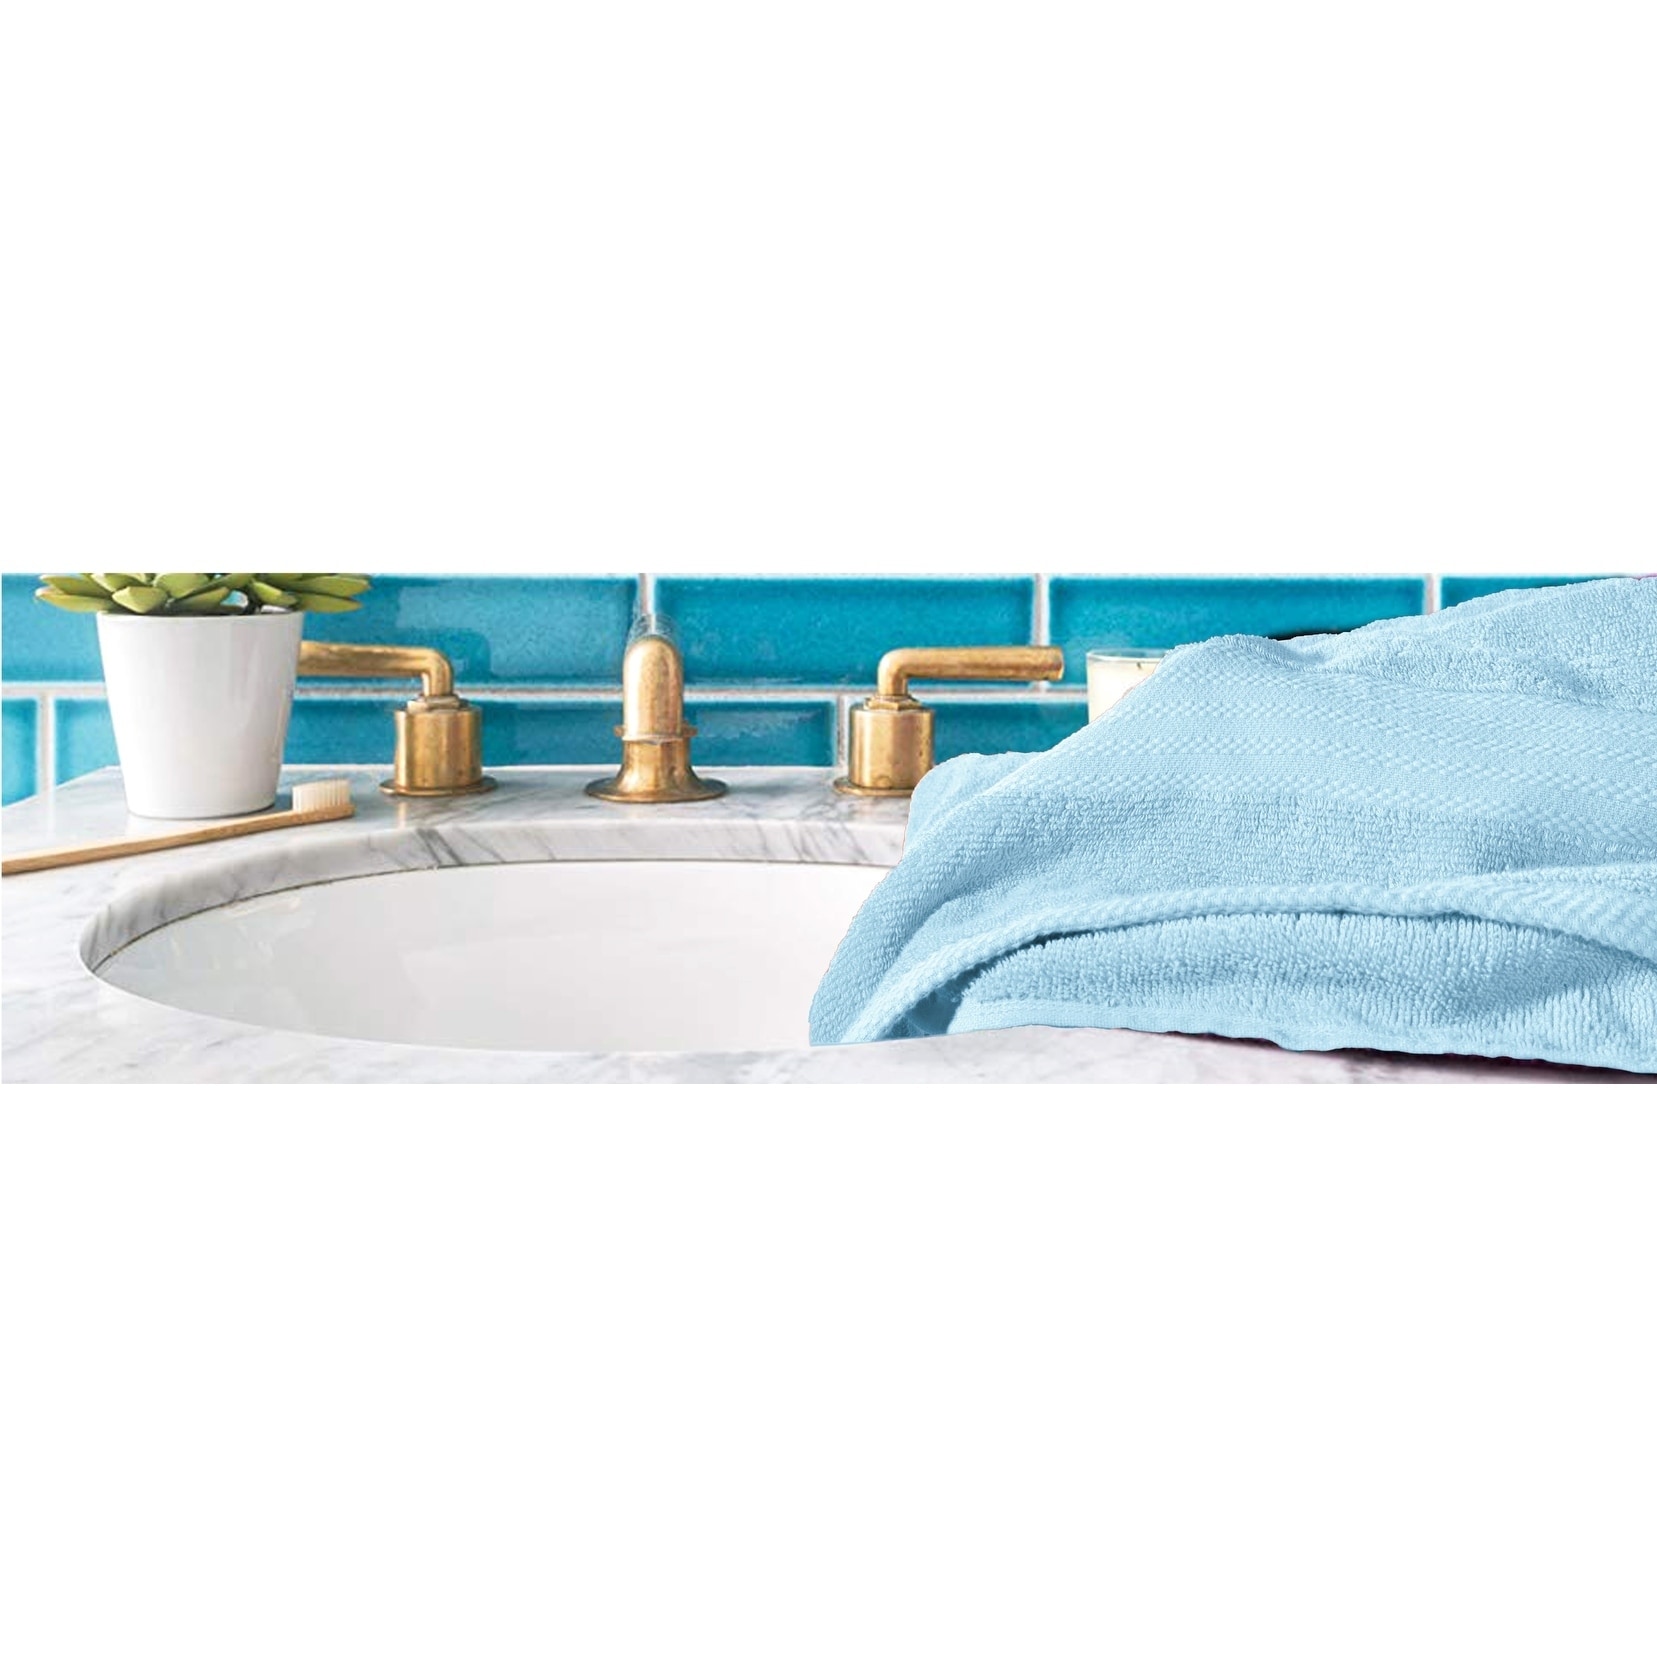 Soft and Plush, 100% Cotton, Highly Absorbent, Bathroom Towels, Super Soft,  Piece Towel Set,, 1 unit - Fred Meyer